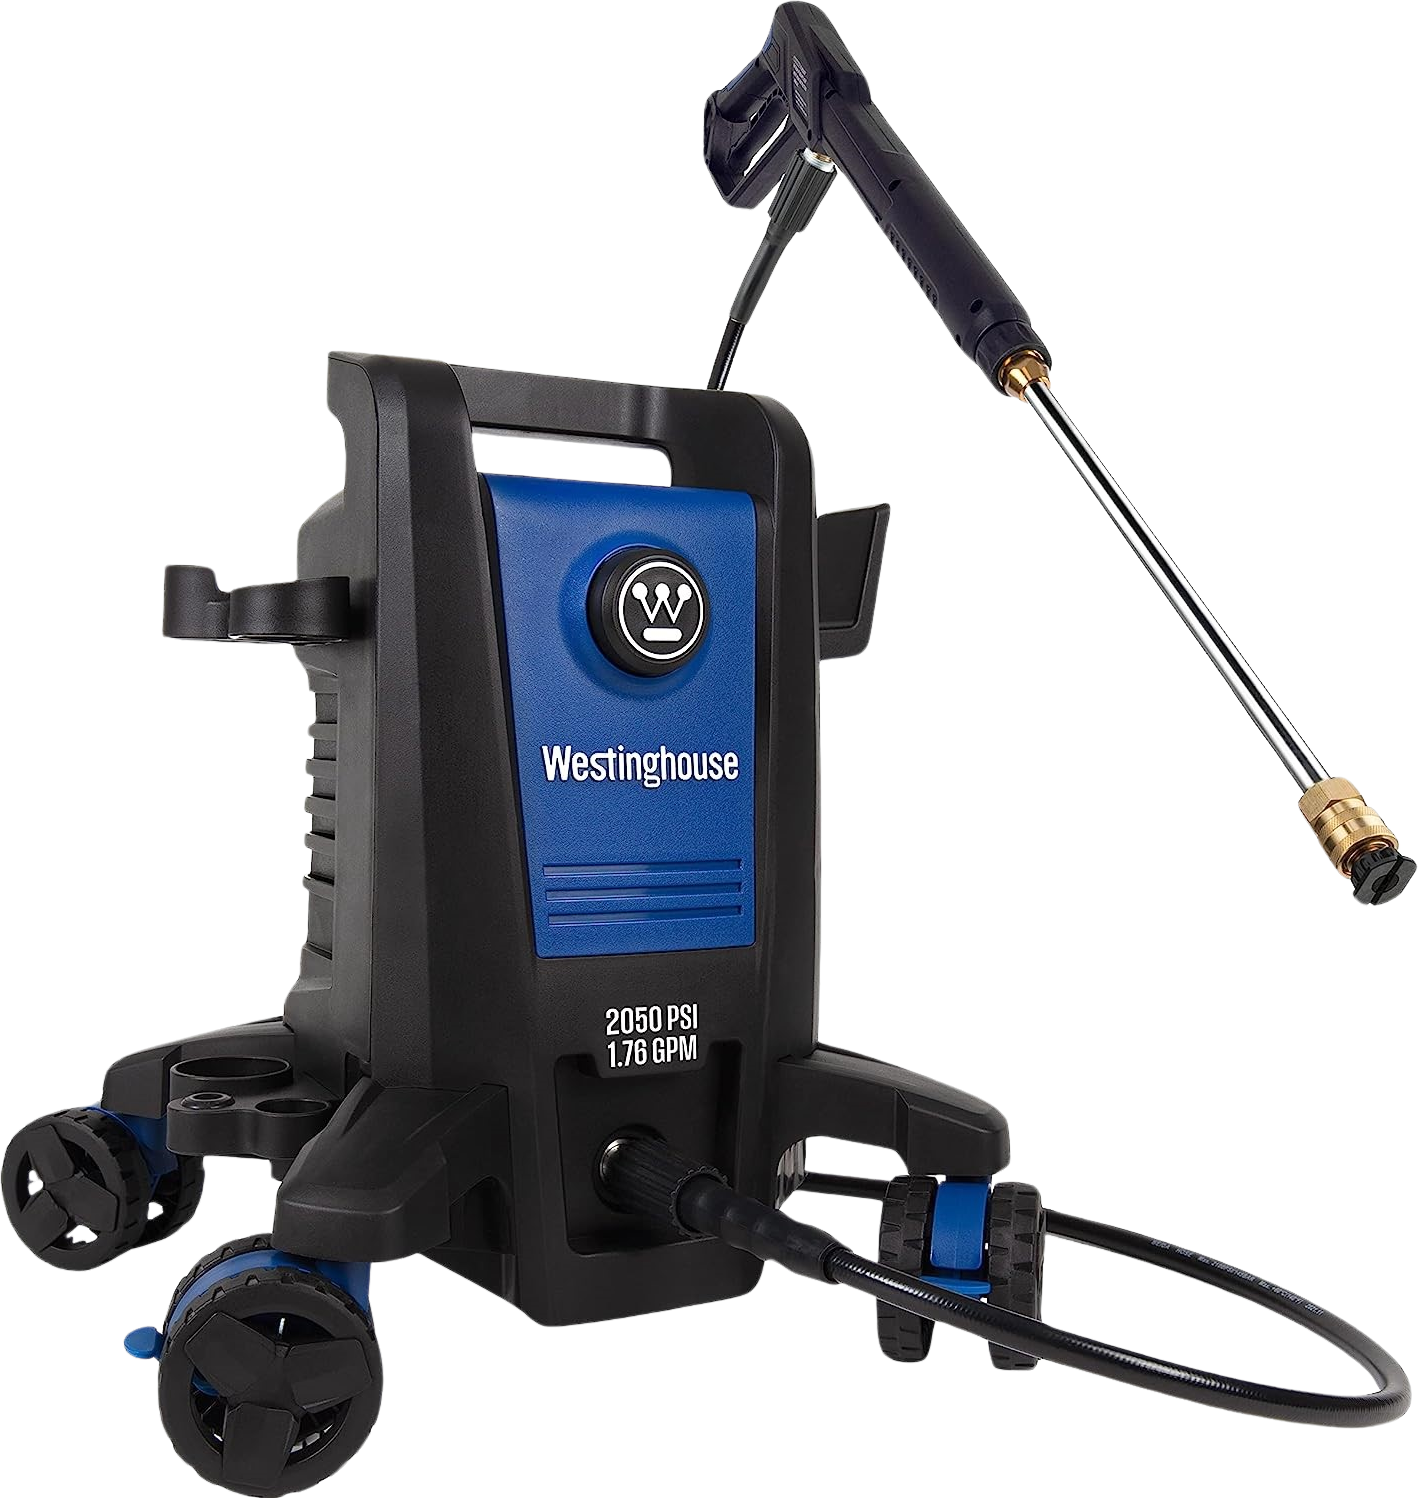 Westinghouse, Westinghouse ePX3100 Electric Pressure Washer 2050 PSI 1.76 GPM New